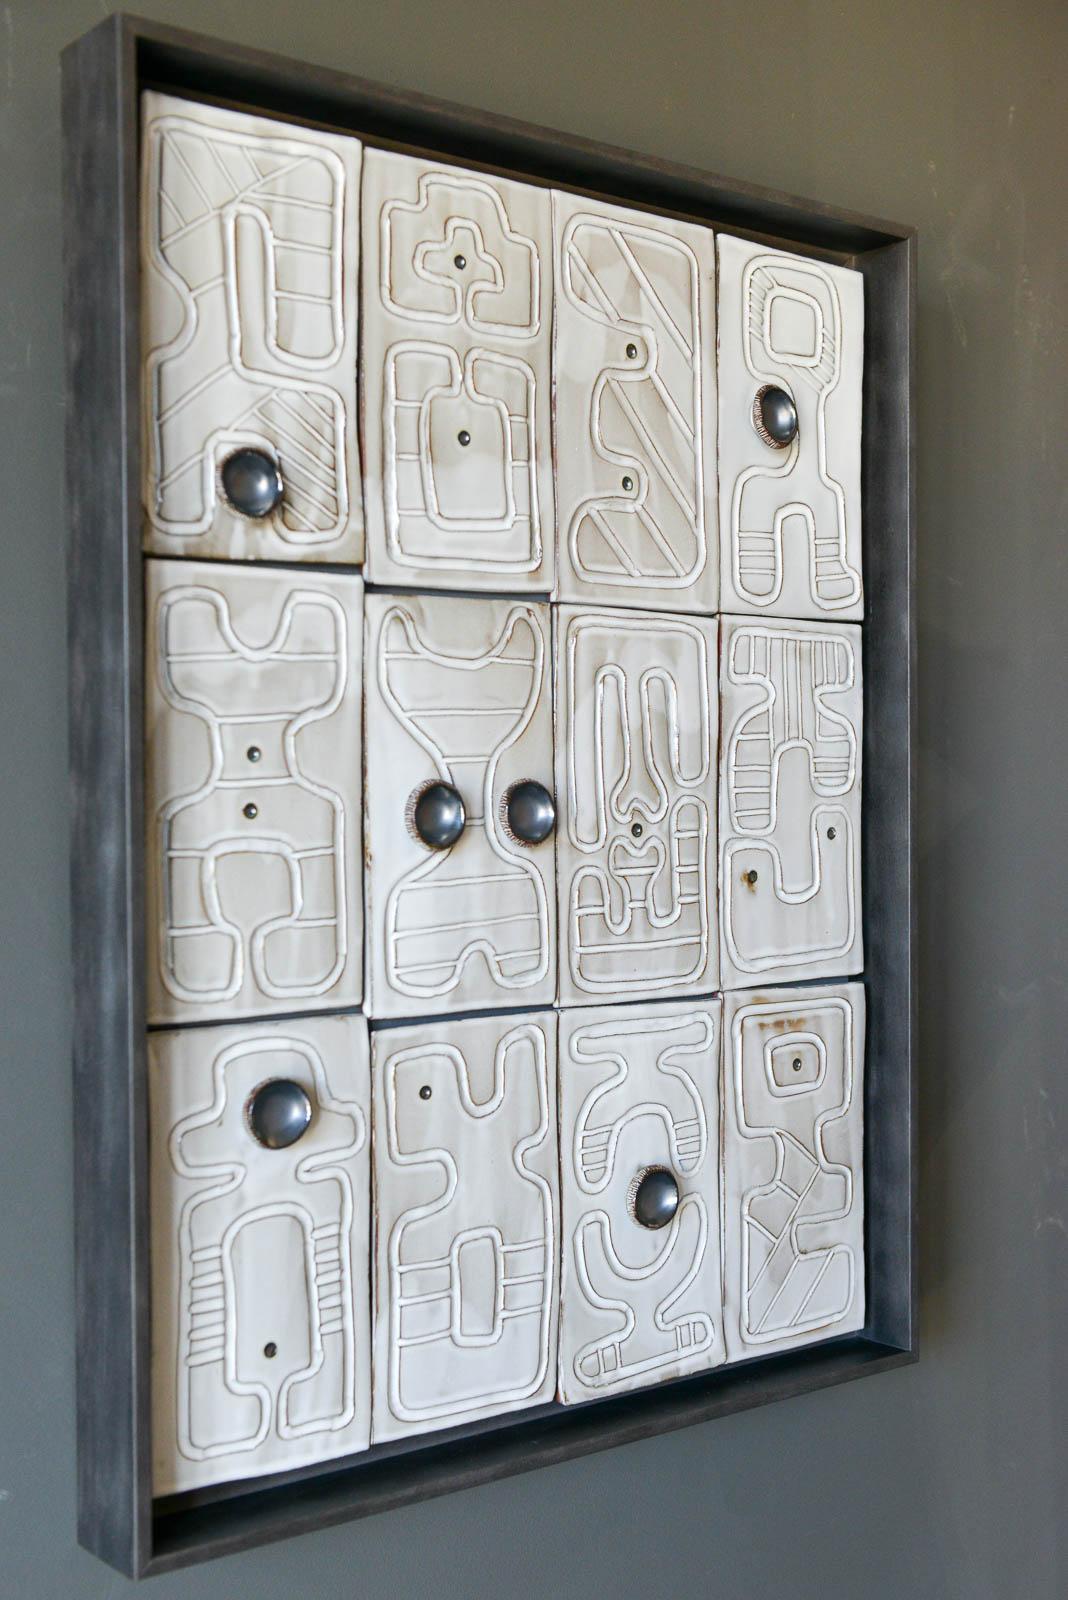 Ceramic Wall Relief by California Artist Adele Martin, 'New Alphabet-Dialog' Original one of a kind ceramic wall relief sculpture by California artist Adele Martin, each tile is handcrafted and individually created, glazed and mounted with a